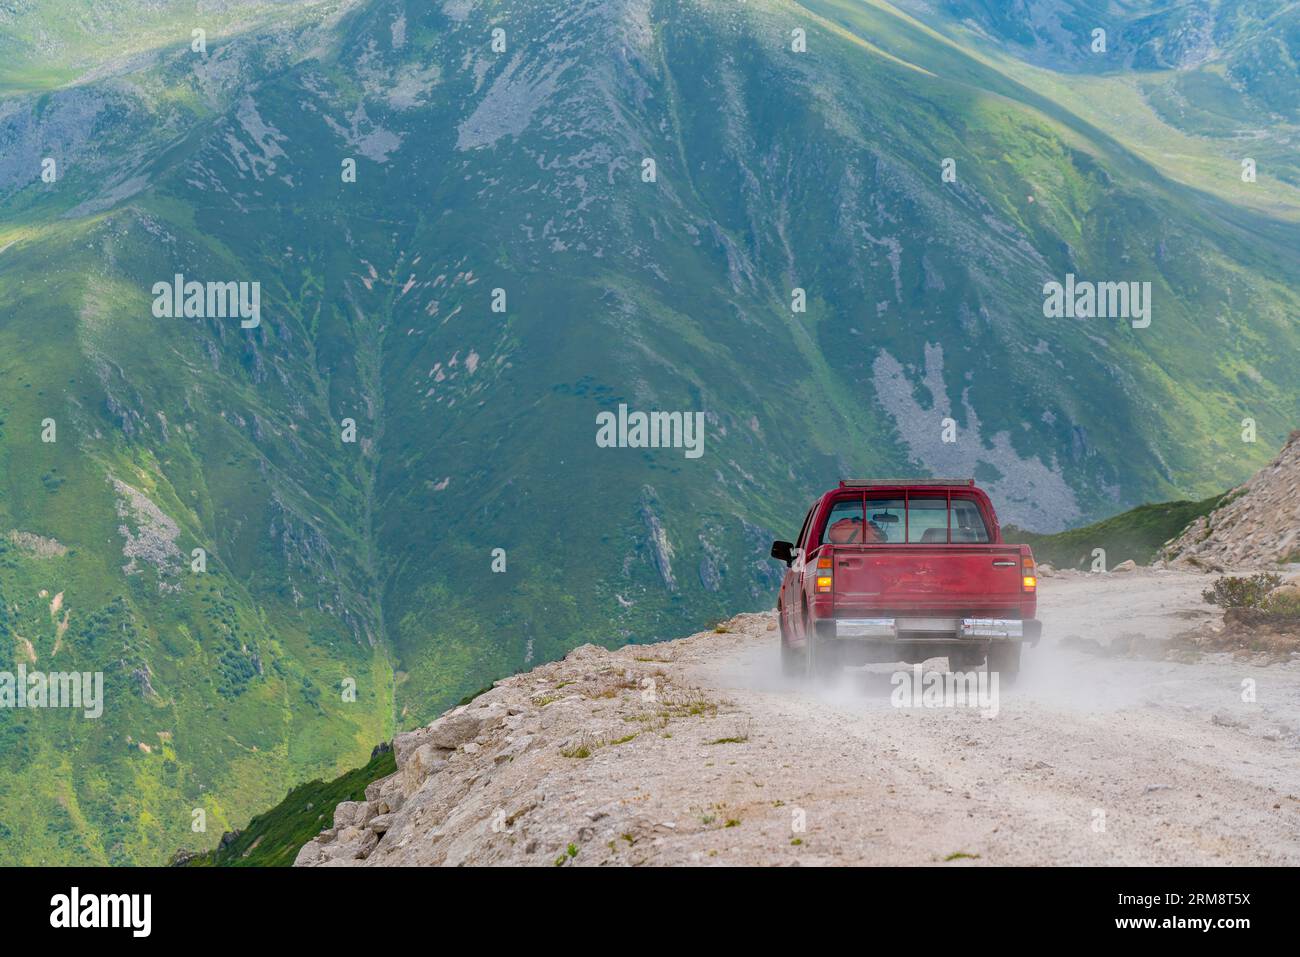 A red pickup truck driving on dirt roads on high plateau roads in Turkey Stock Photo